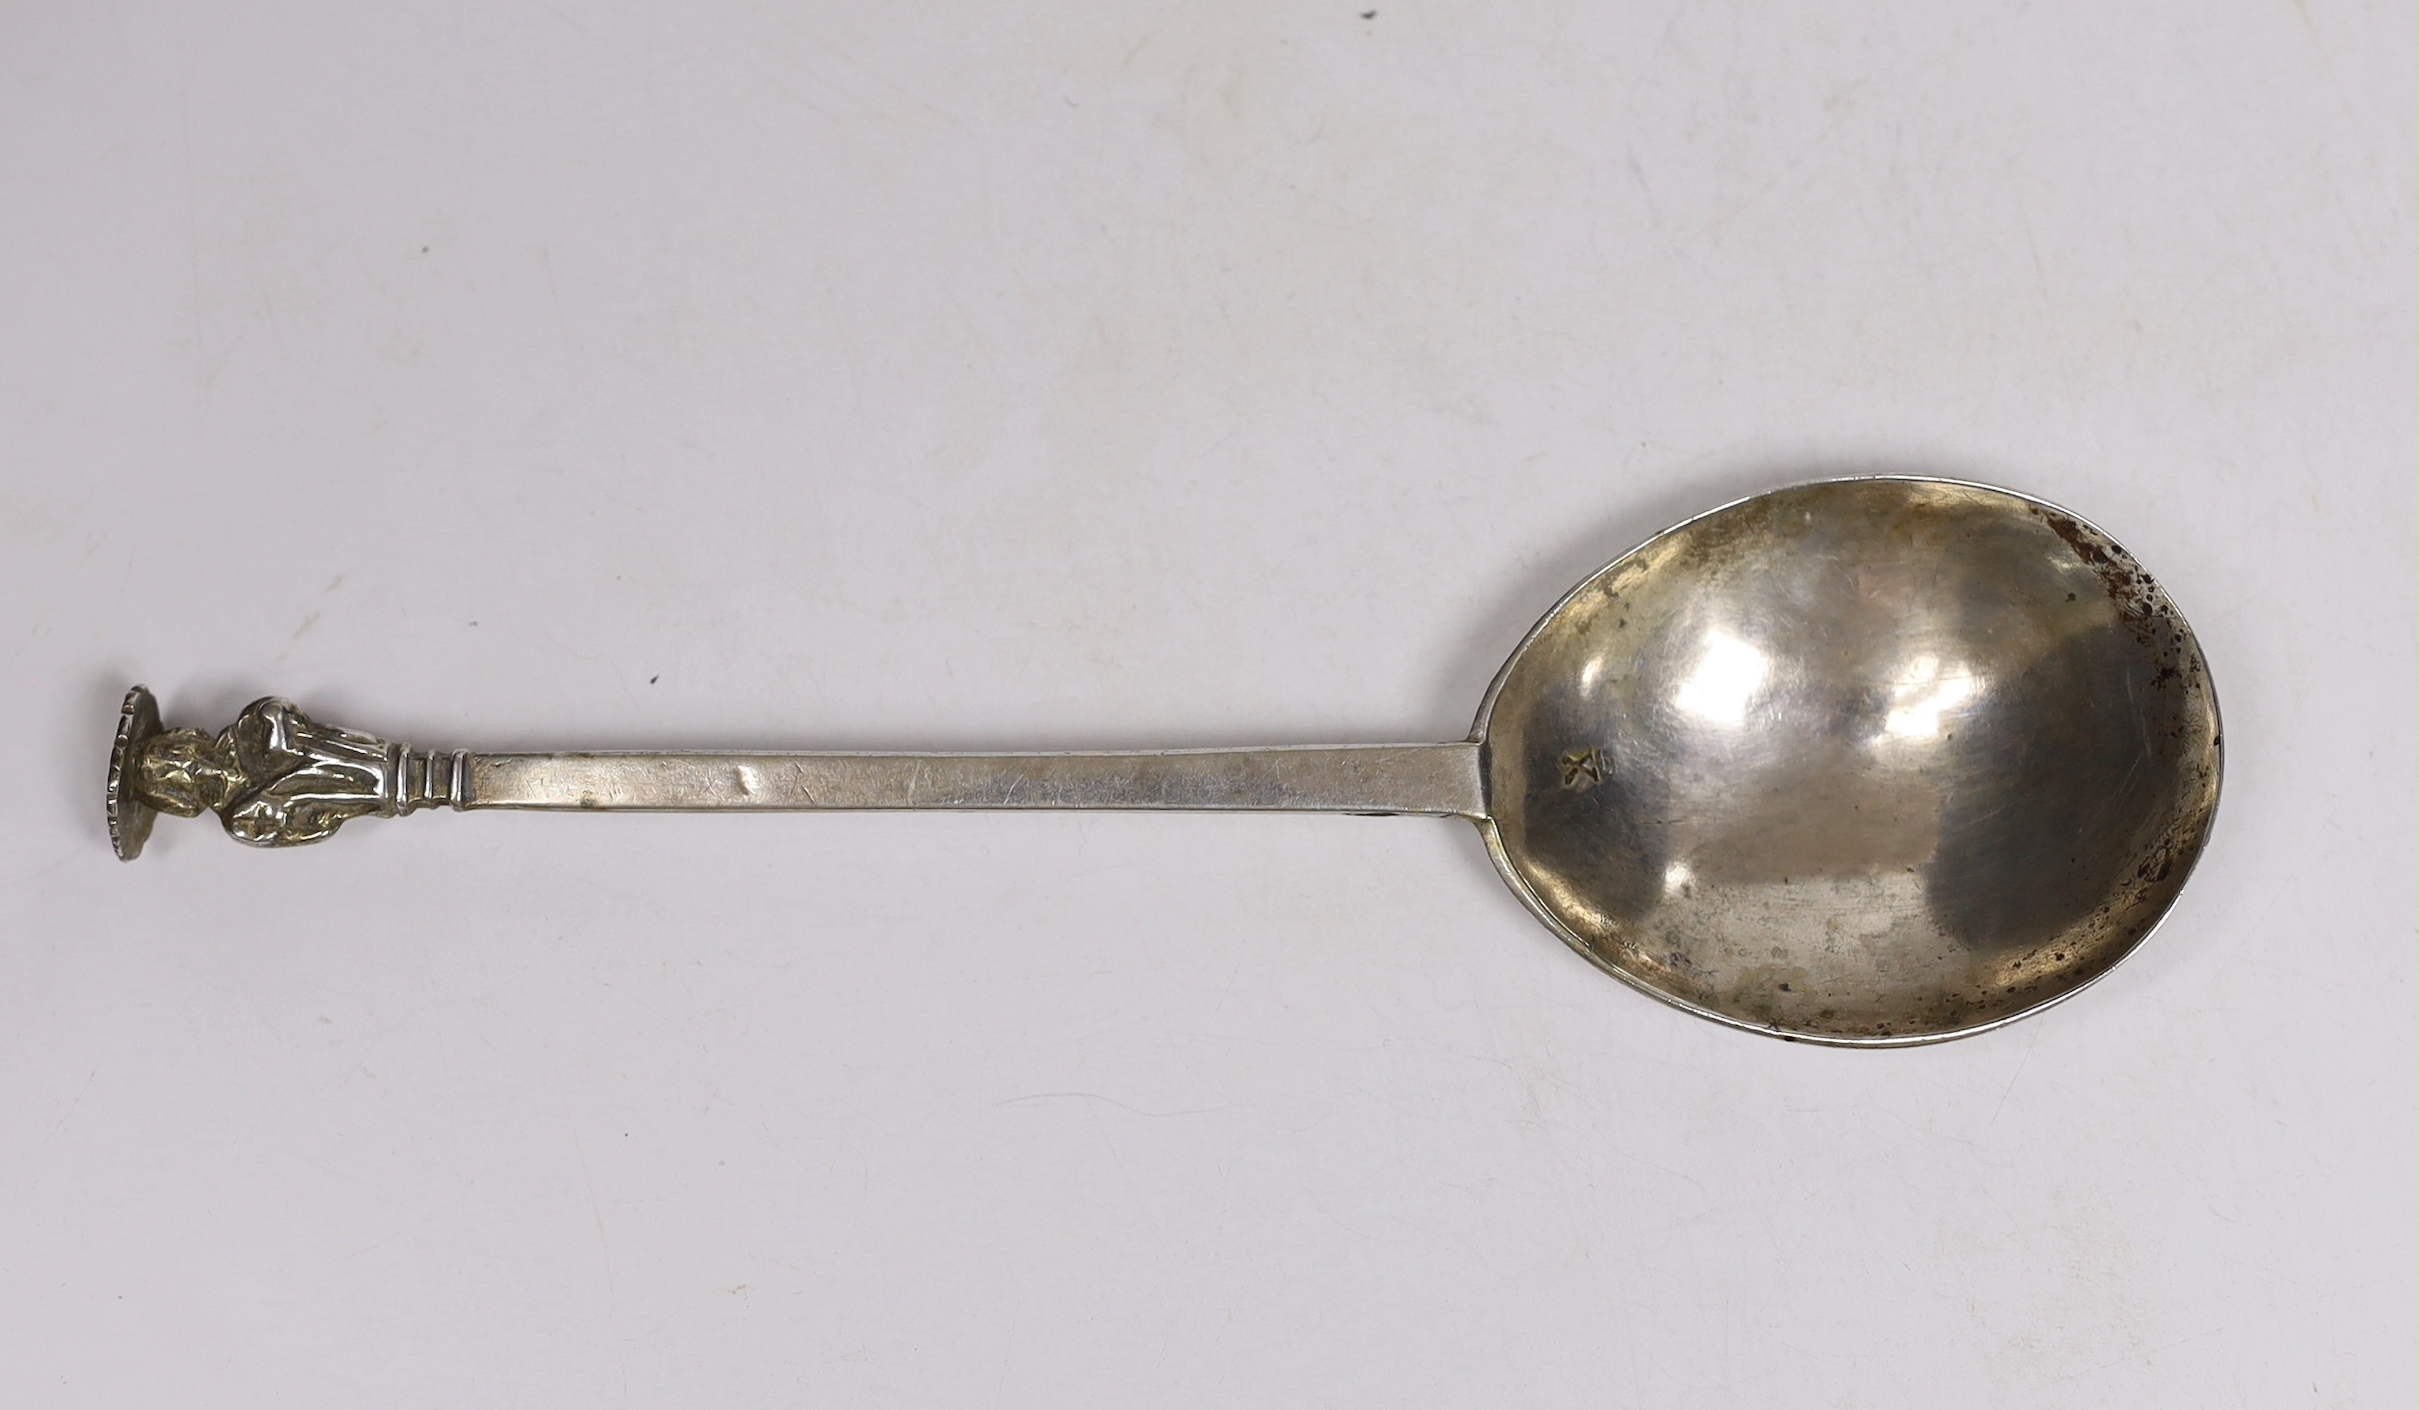 An antique white metal apostle spoon, with 'X' stamp to the bowl below a maker's mark?, the bowl back with two sets of prick dot initials, 19.4xm, 46 grams.